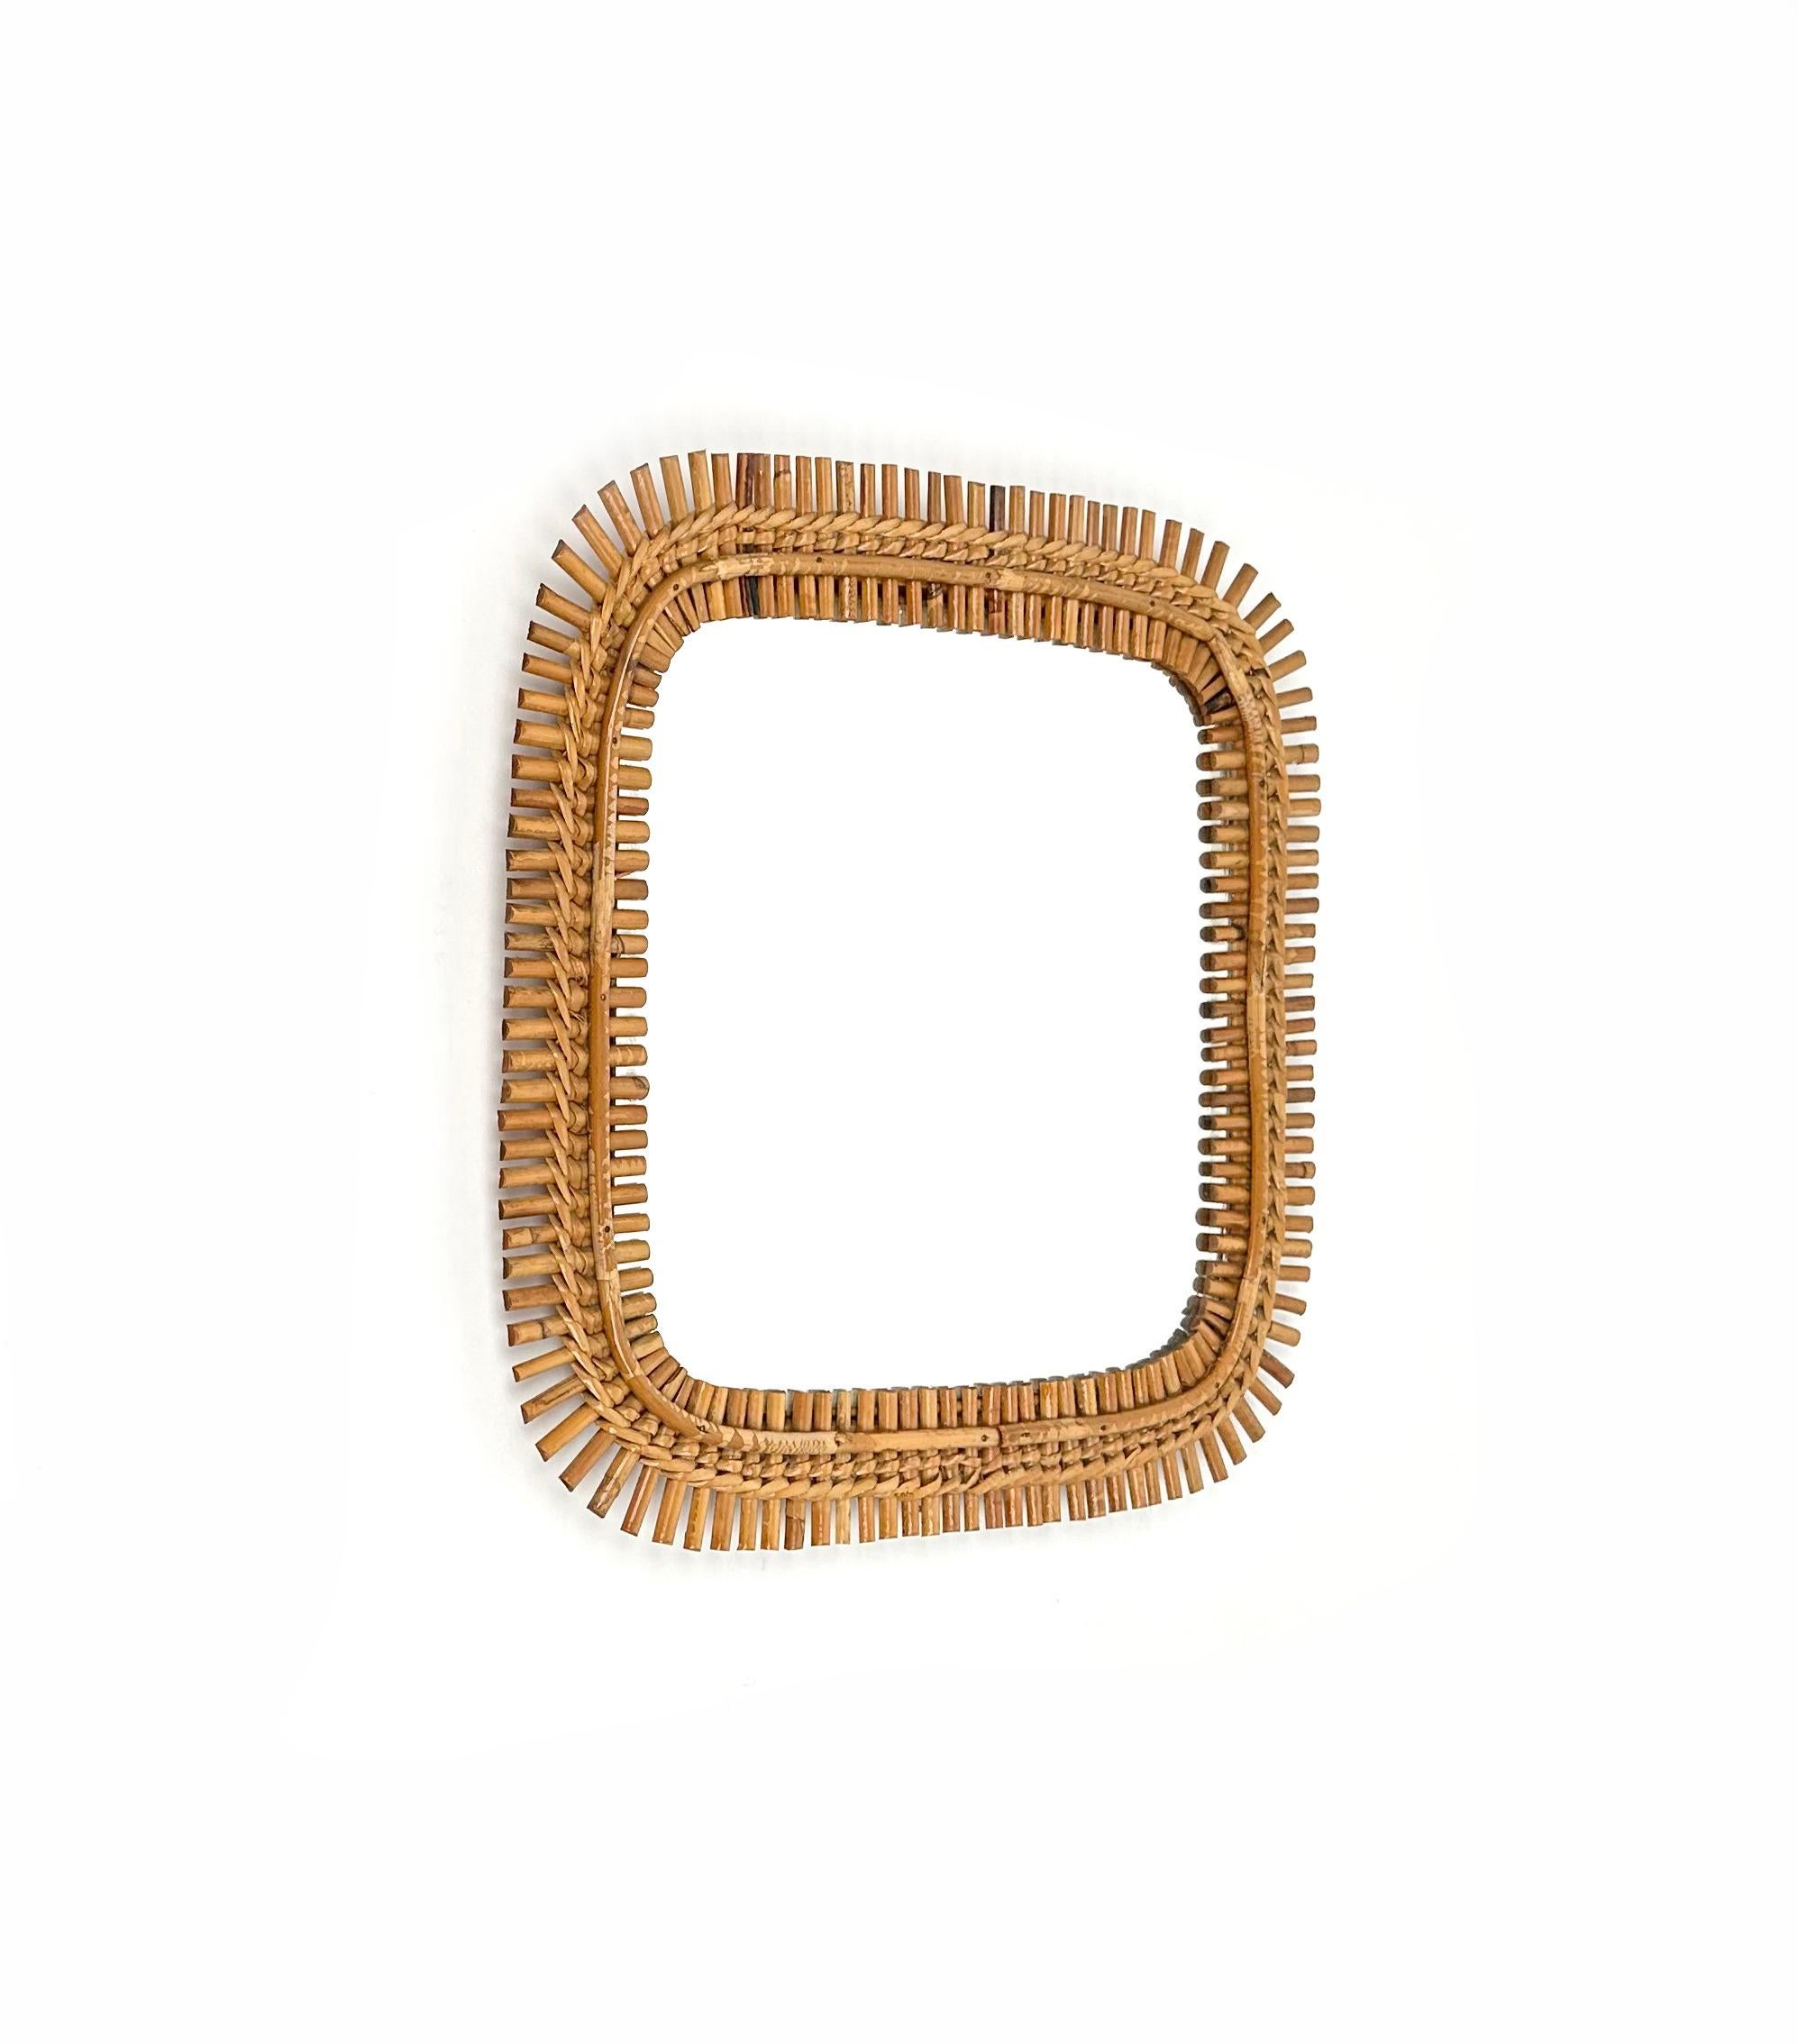 Beautiful squared wall mirror in bamboo and rattan.

Made in Italy in the 1960s.